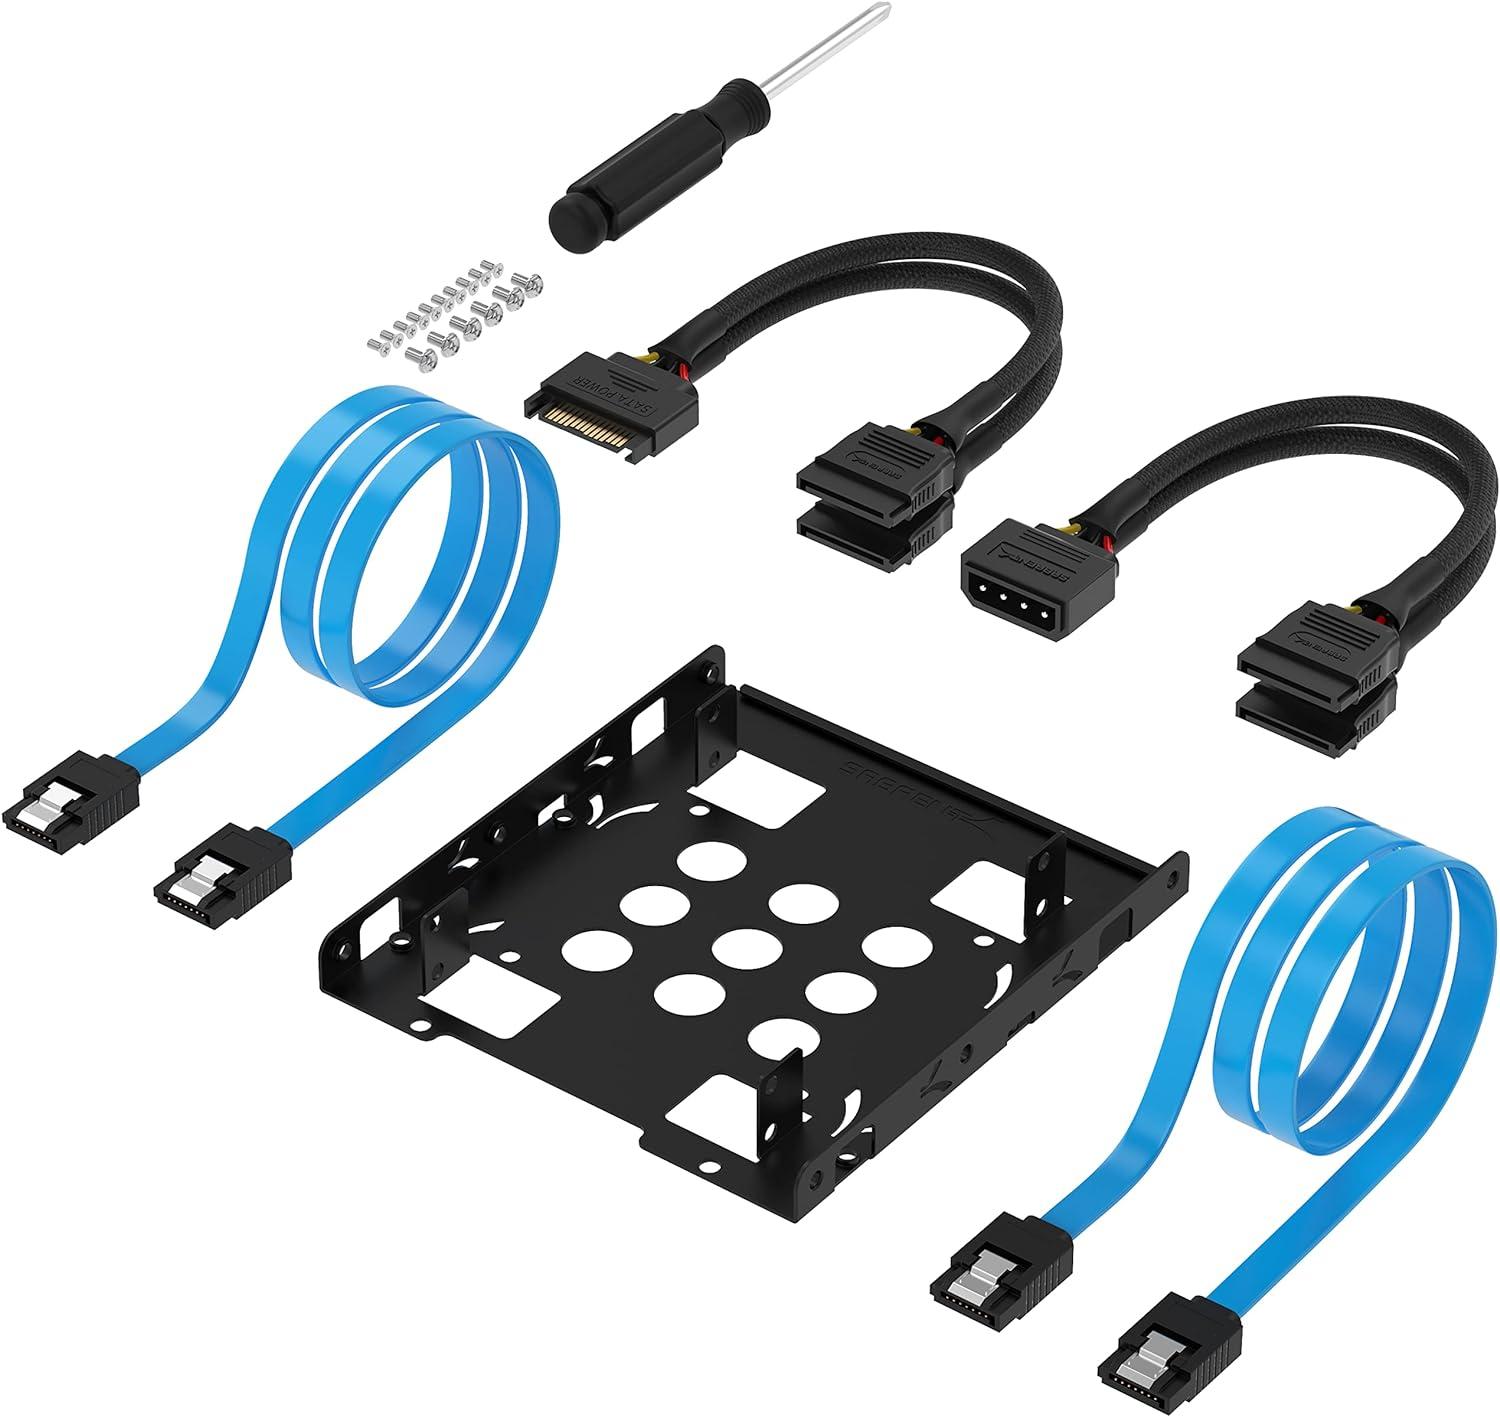 Sabrent 3.5in to SSD Internal Hard Drive Mounting Kit for $6.98